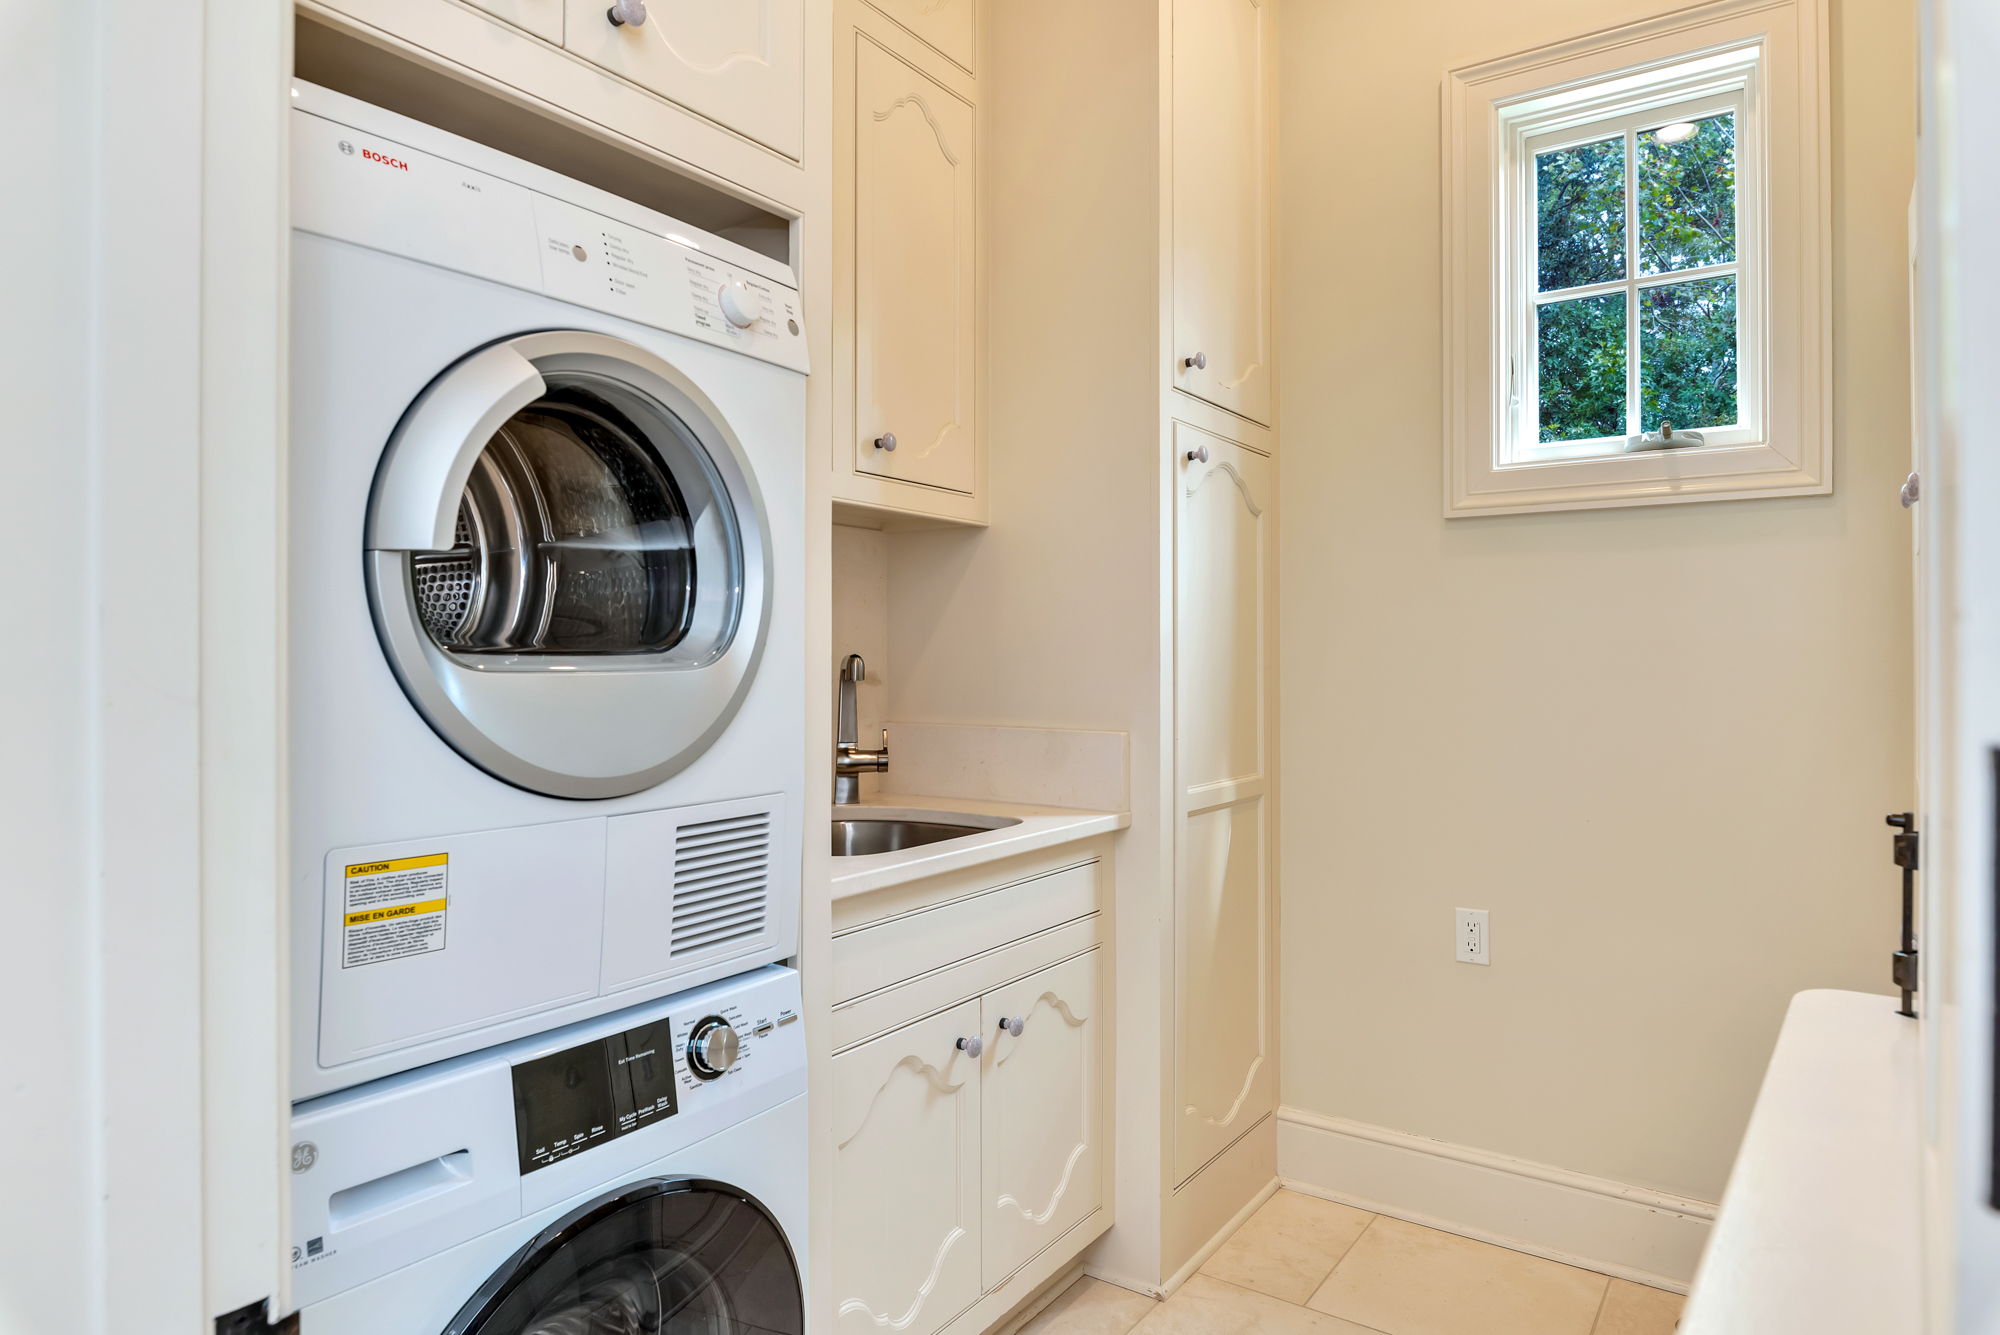 With a convenient main laundry room